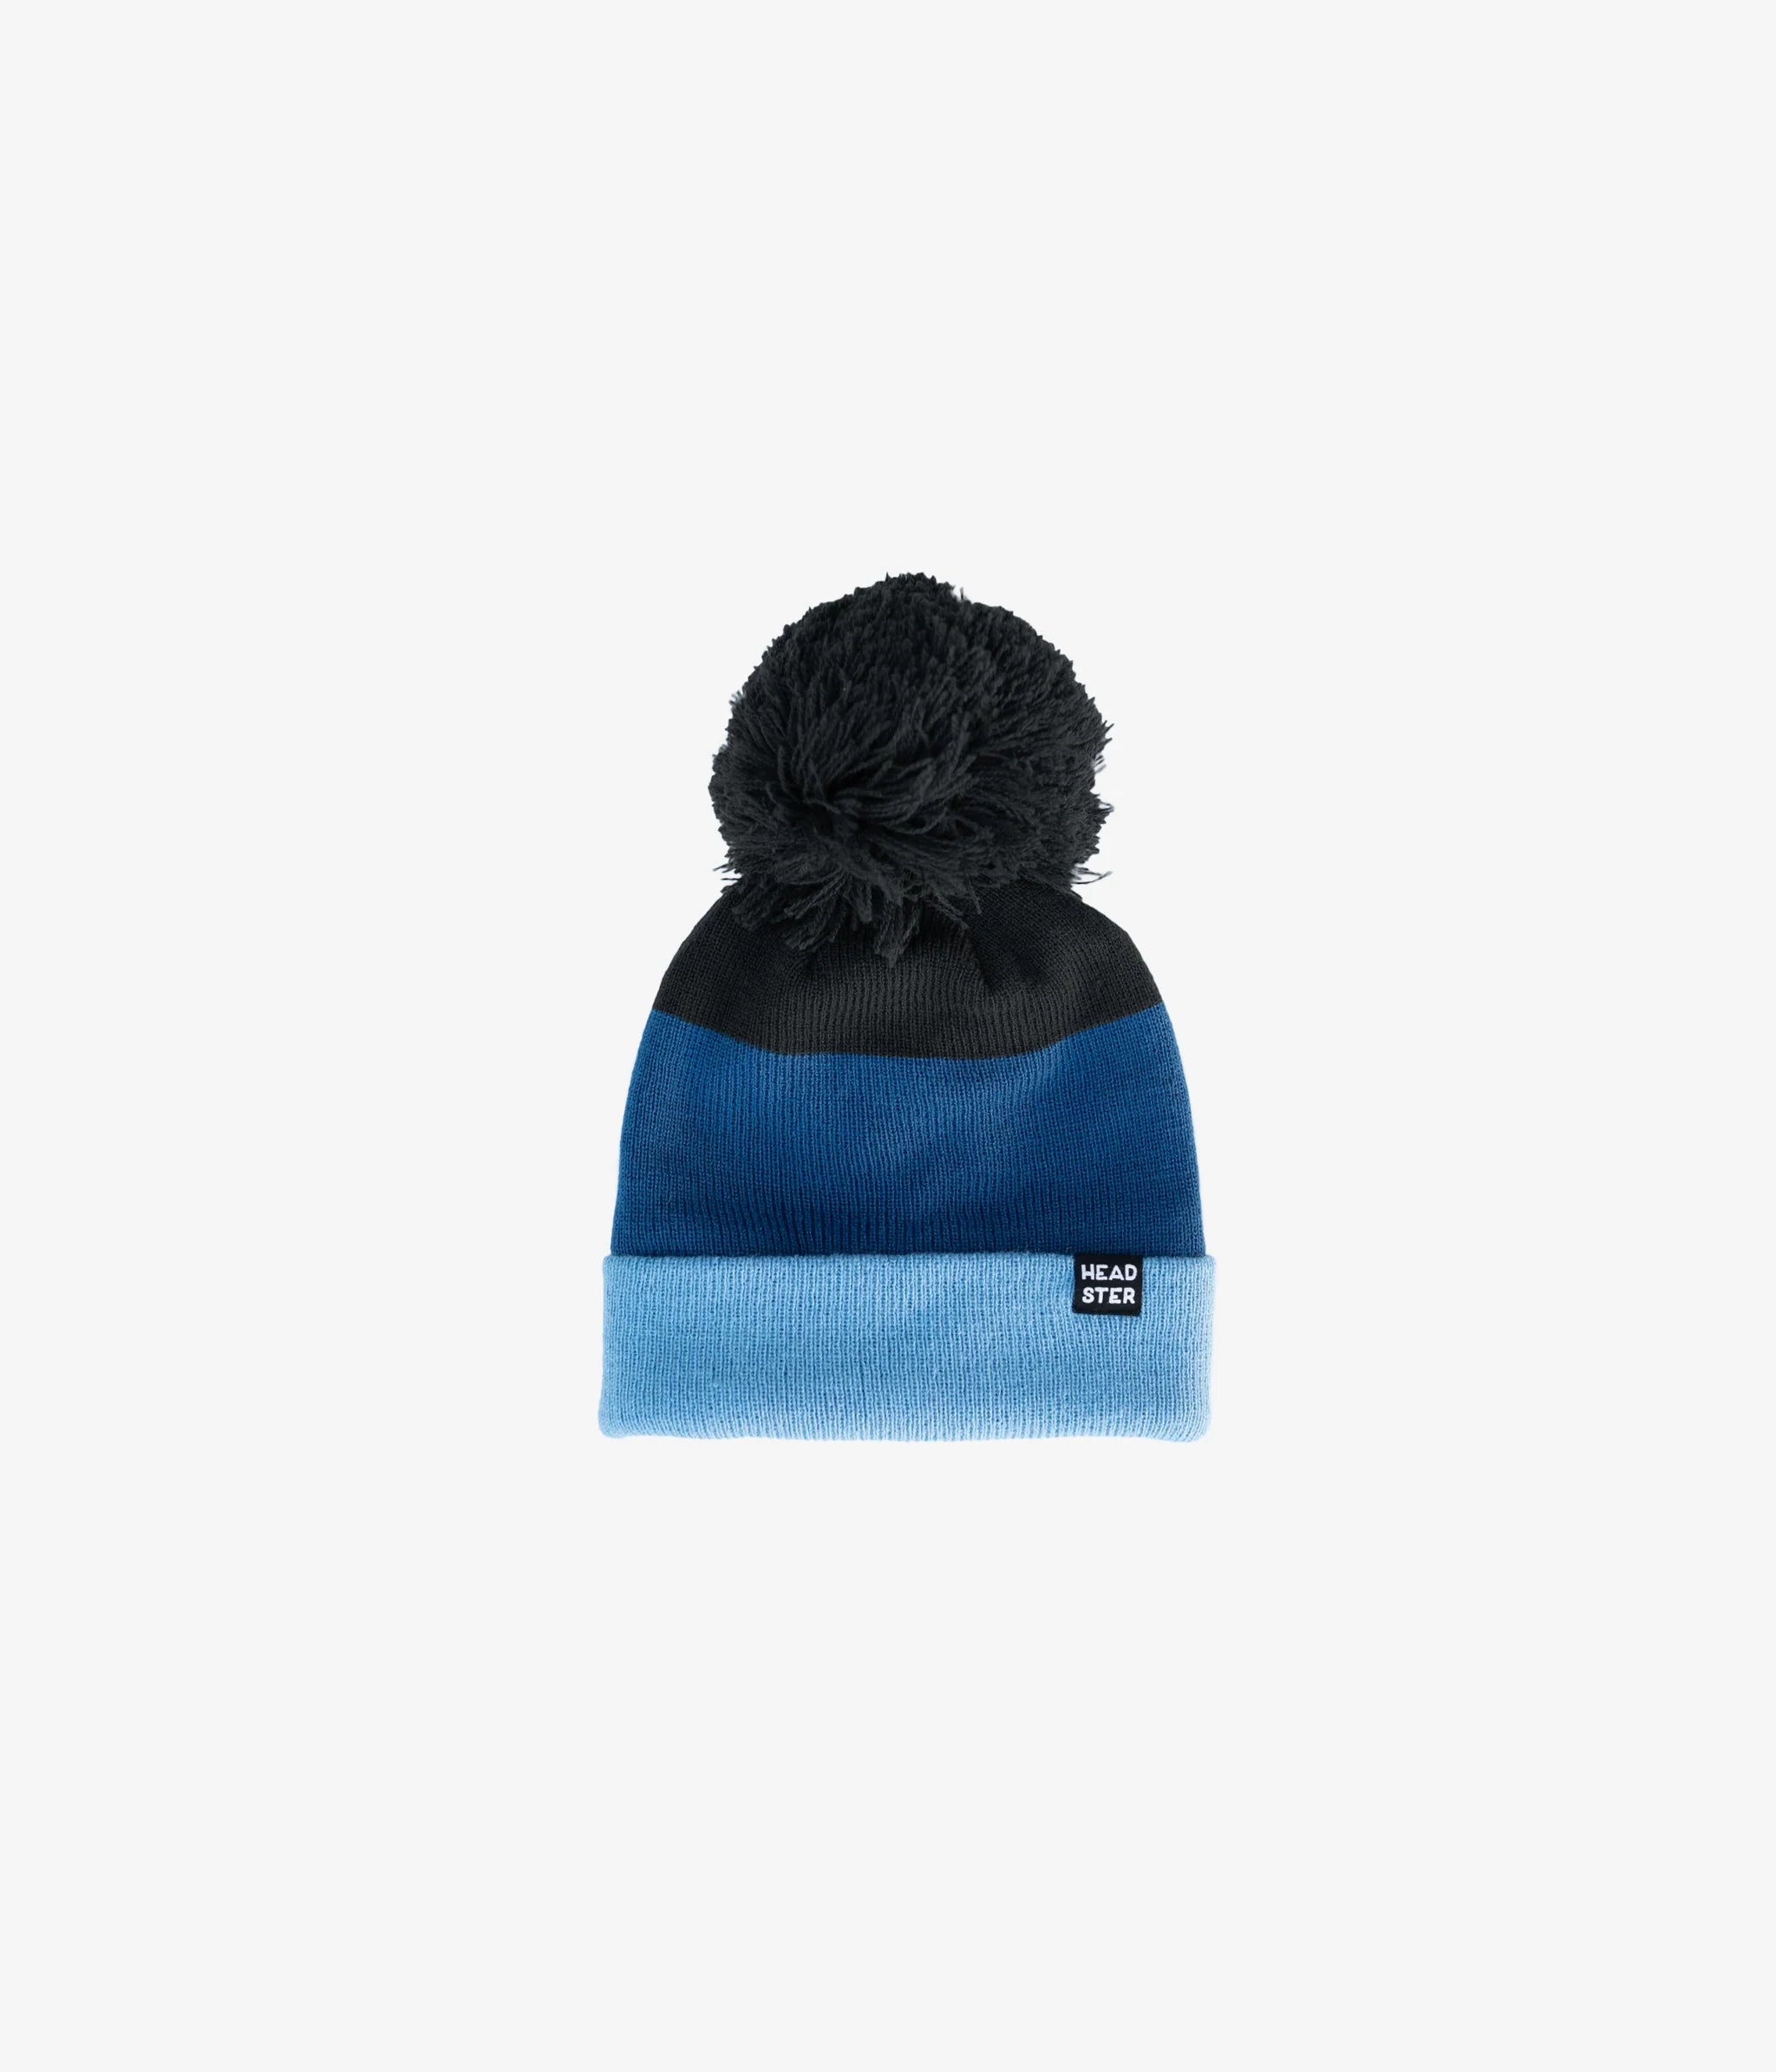 Headster - Tuque Tricolor